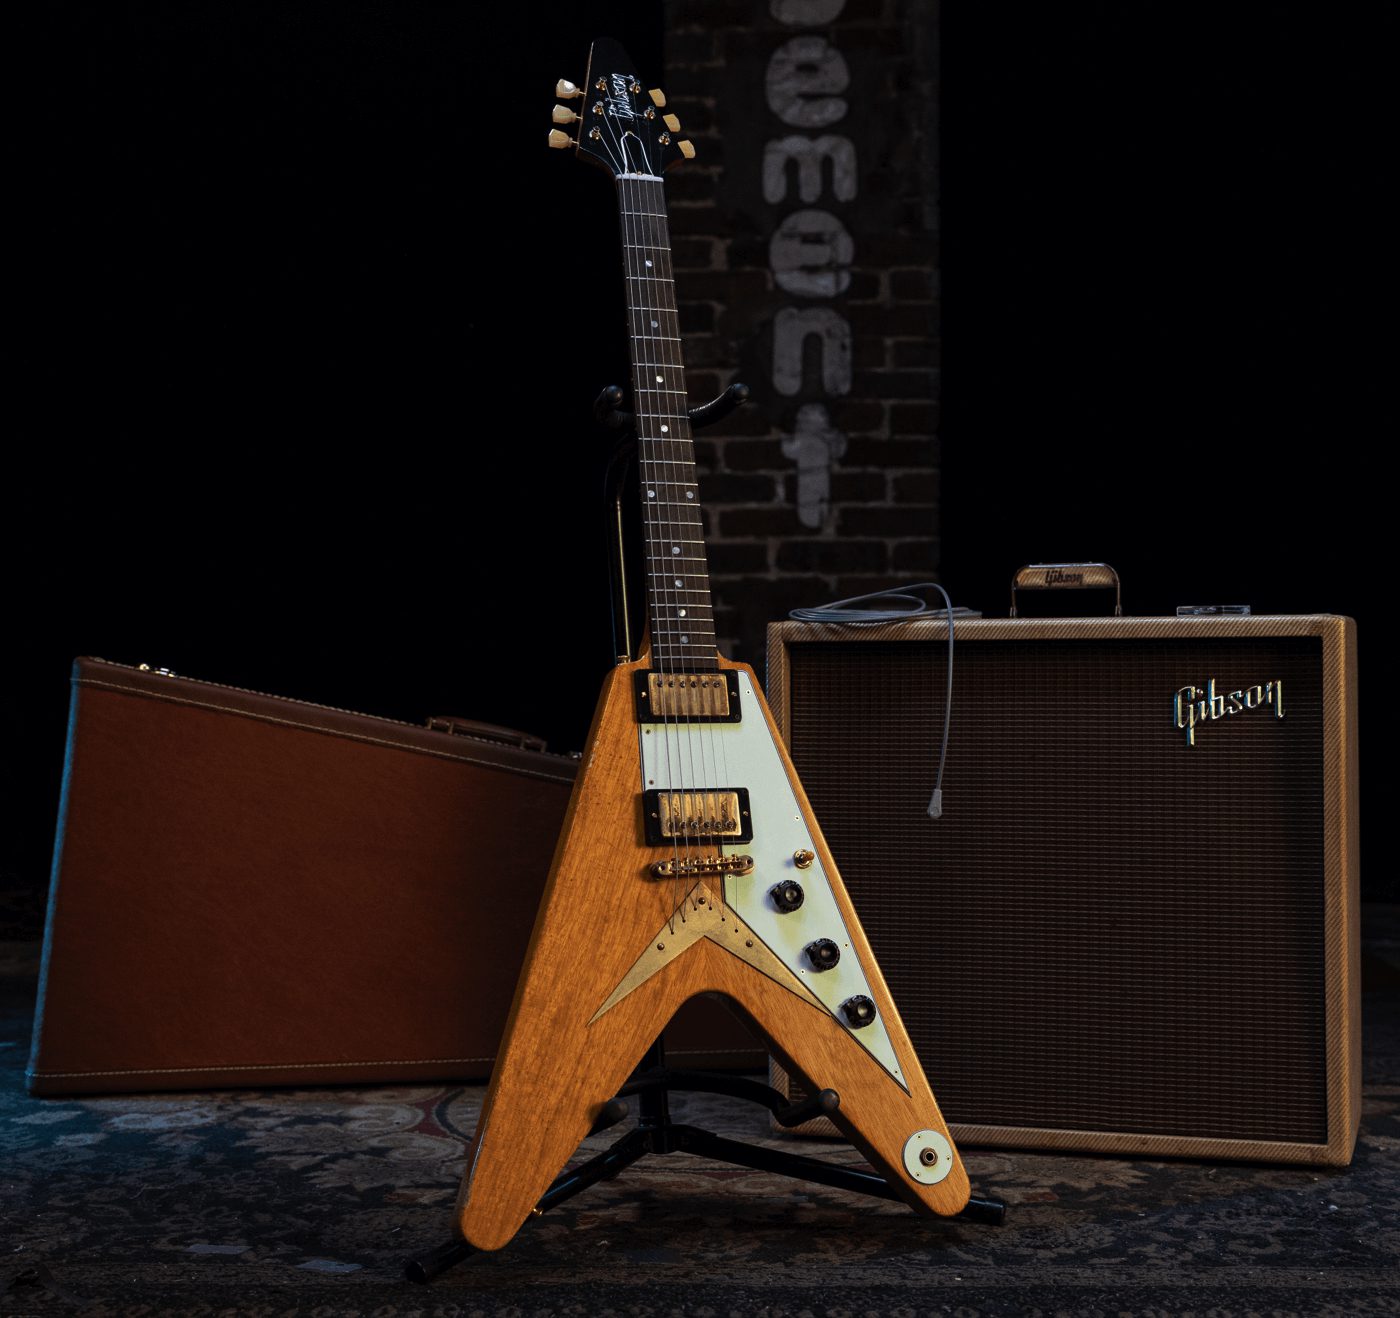 New Gibson video on the Collectors Edition 1958 Korina Flying V and Explorer